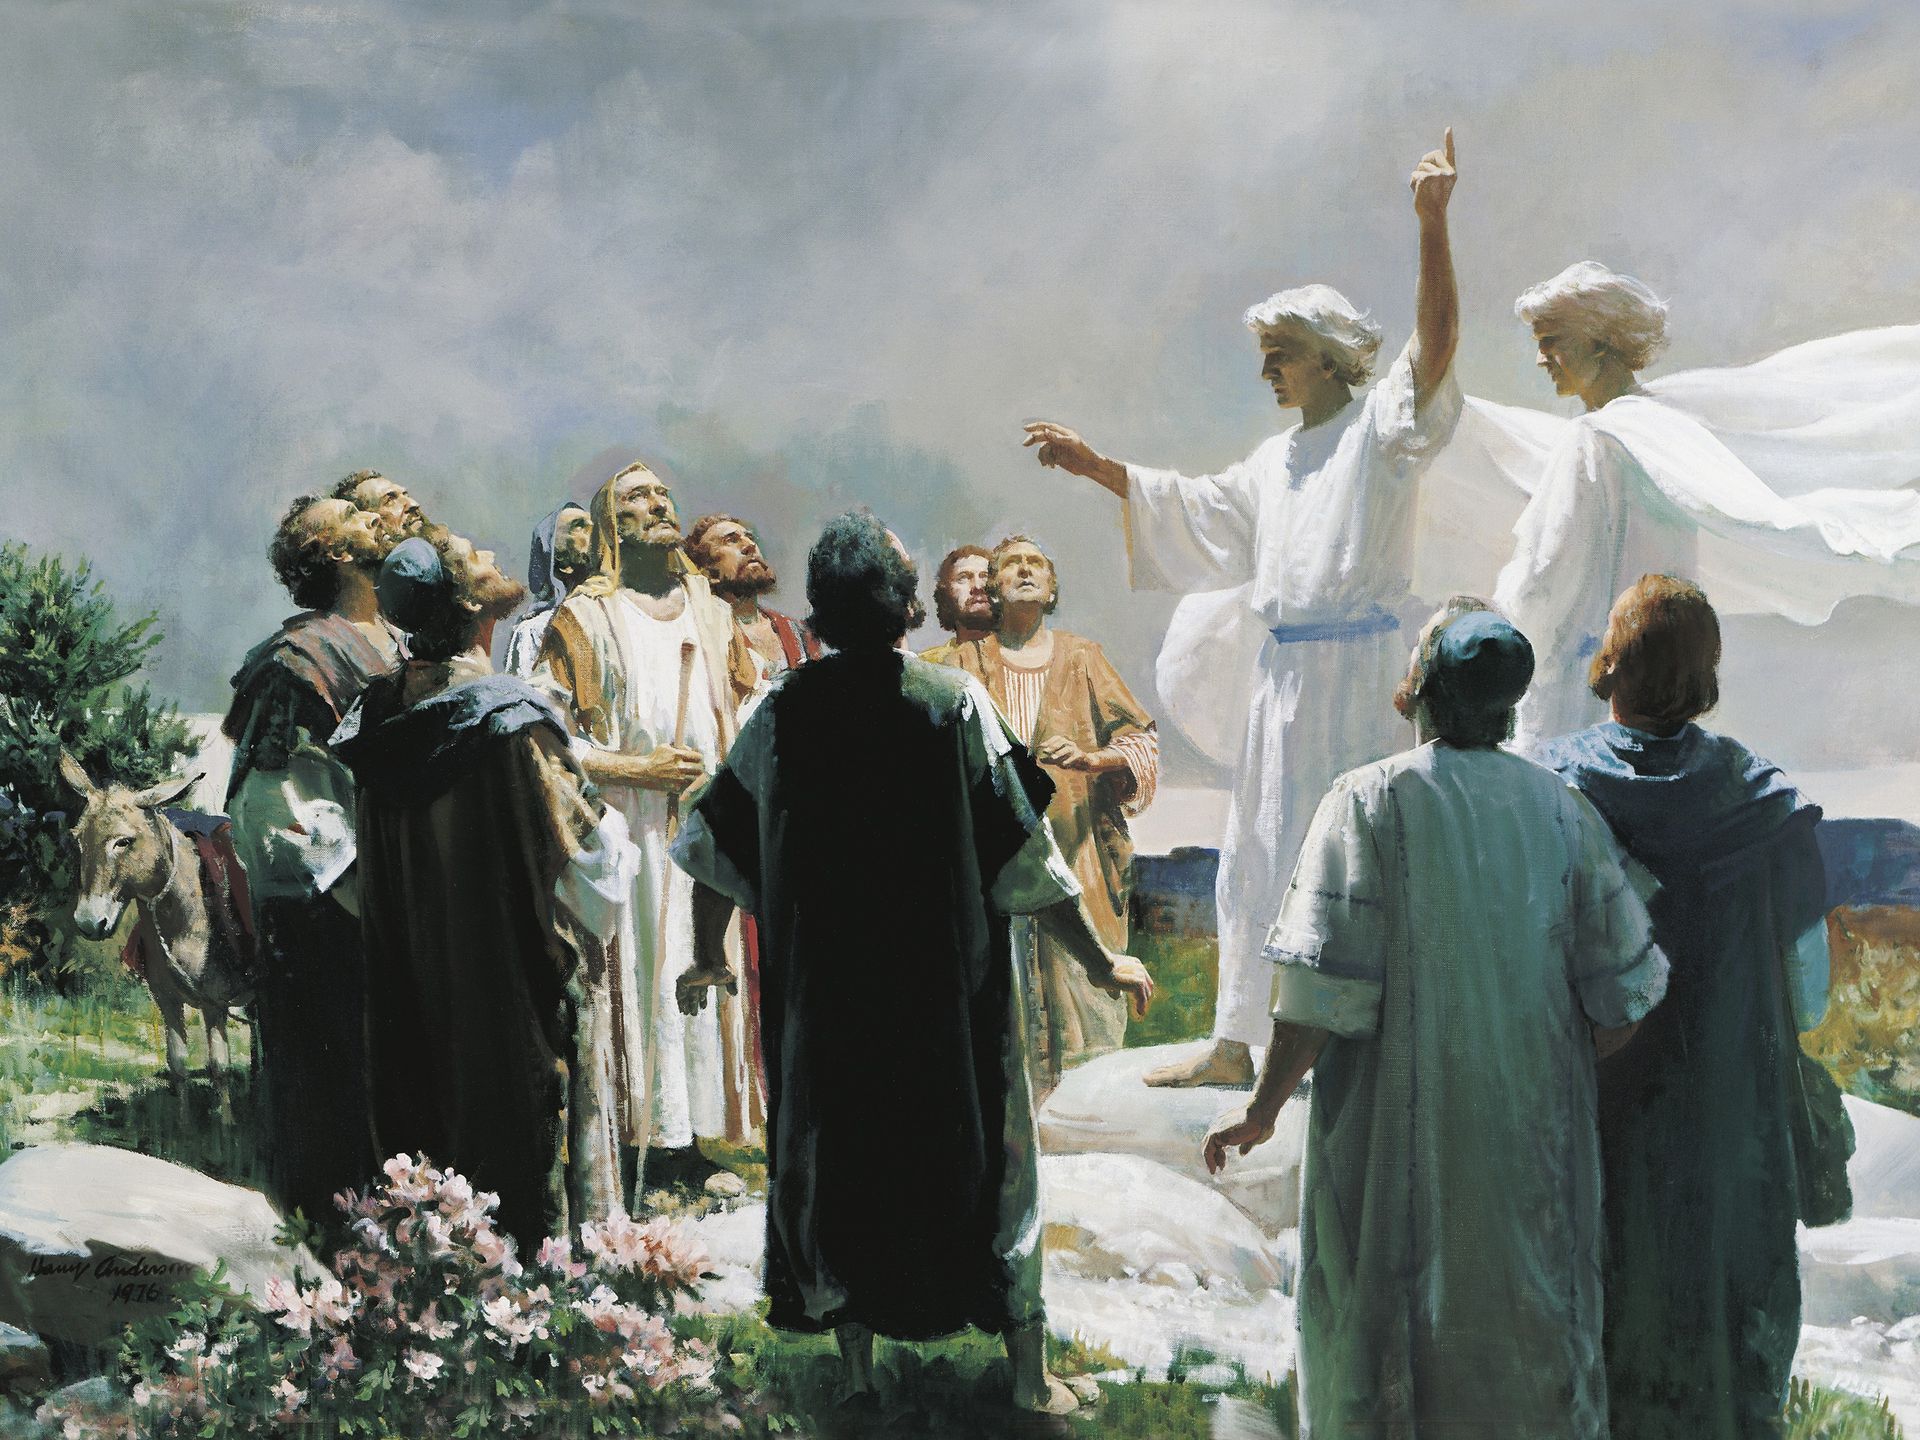 The eleven apostles of Jesus Christ (all except Judas Iscariot) gathered together in Galilee. Two angels (dressed in white) are standing with the apostles and pointing to the heavens. The apostles are looking upward. The painting depicts the ascension of the resurrected Jesus Christ into the heavens. Christ is not depicted in the picture. (Mark 16:19-20) (Luke 24:50-53) (Acts 1:9-11)